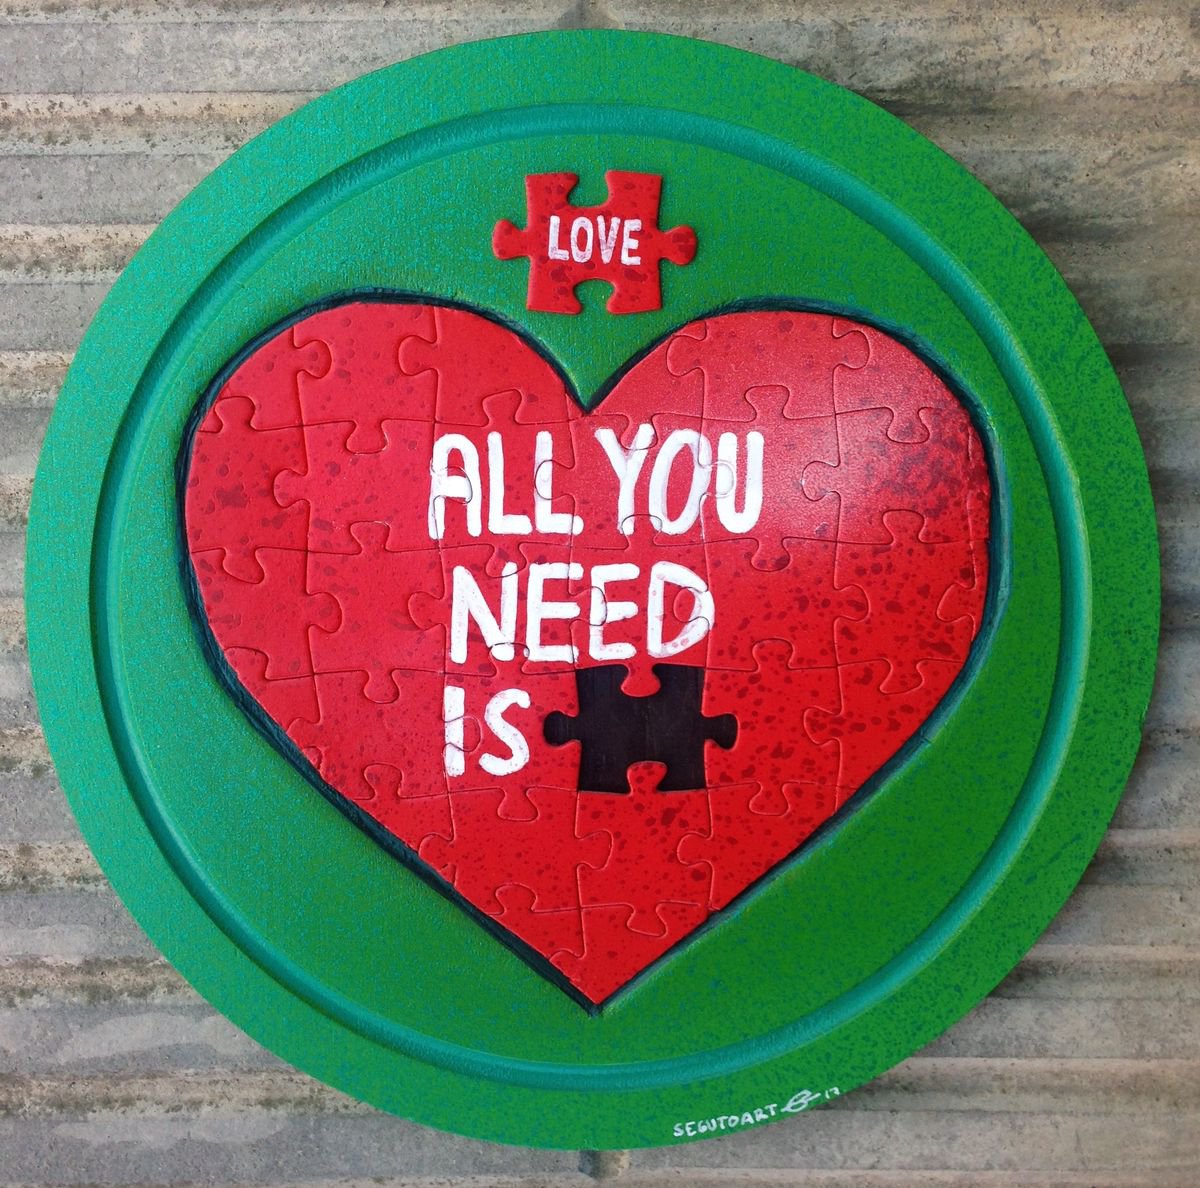 ALL YOU NEED IS LOVE by Seguto